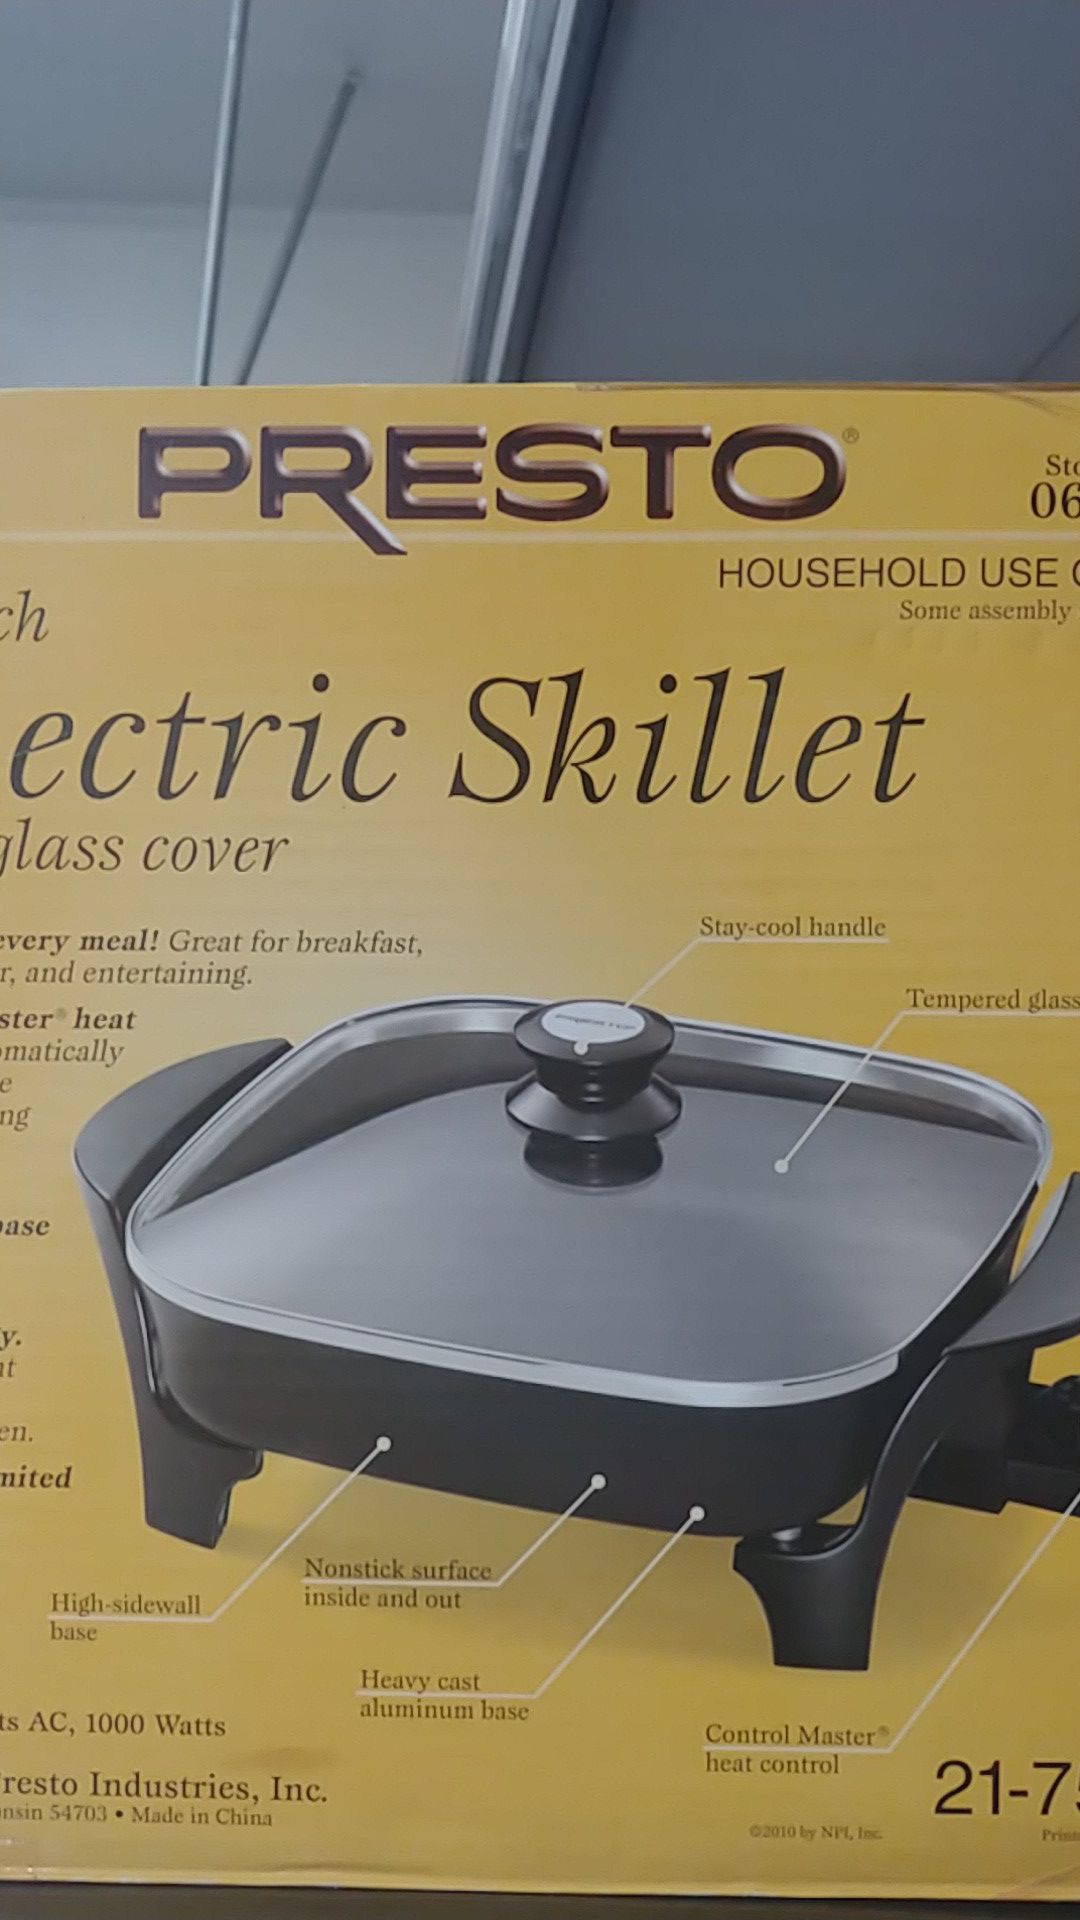 Electric Skillet w/ glass cover